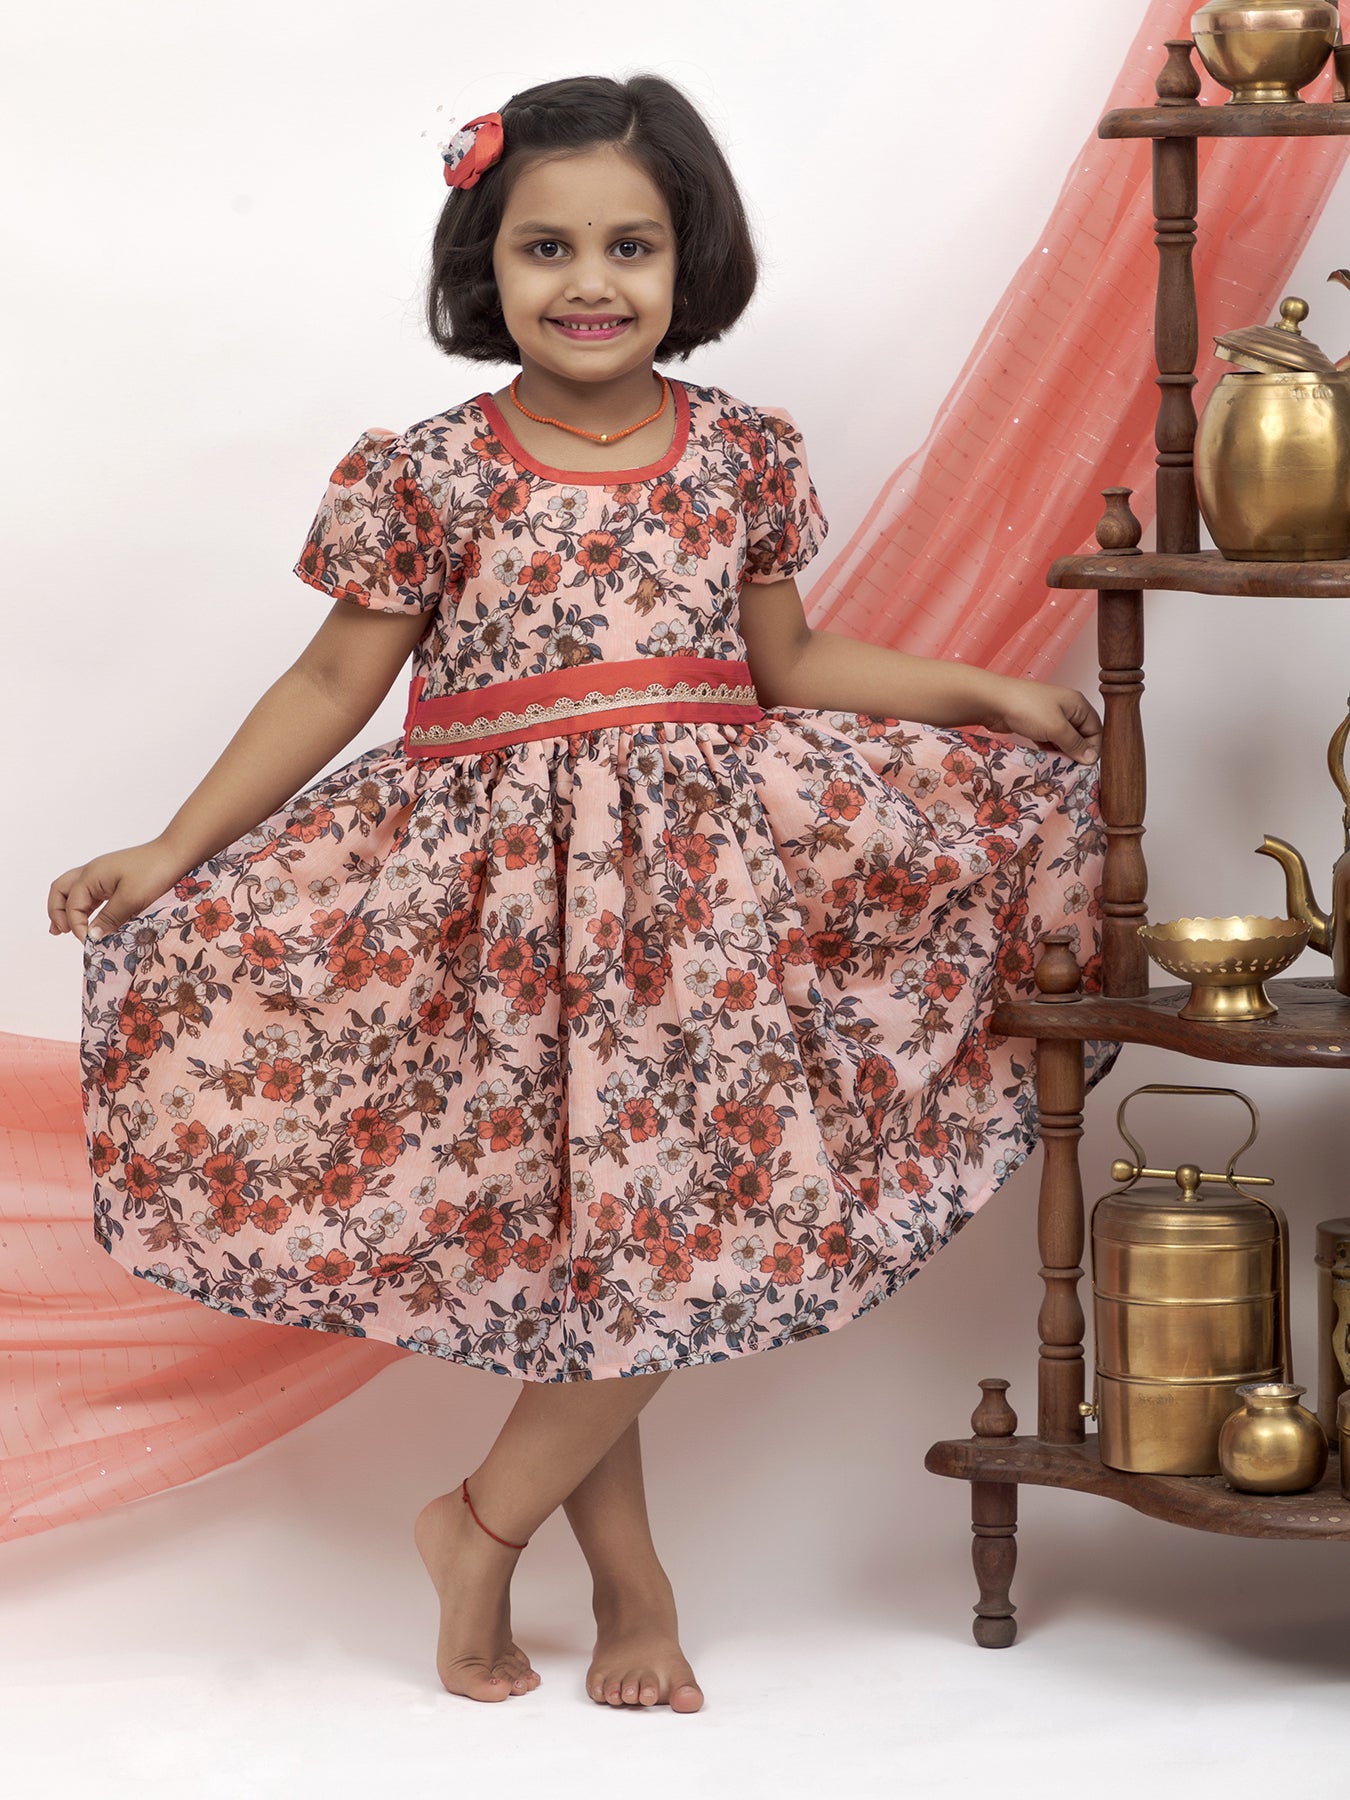 Silk brocade khunn organza floral printed frock dress one piece party paithani ethnic traditional tradition gown for baby girl